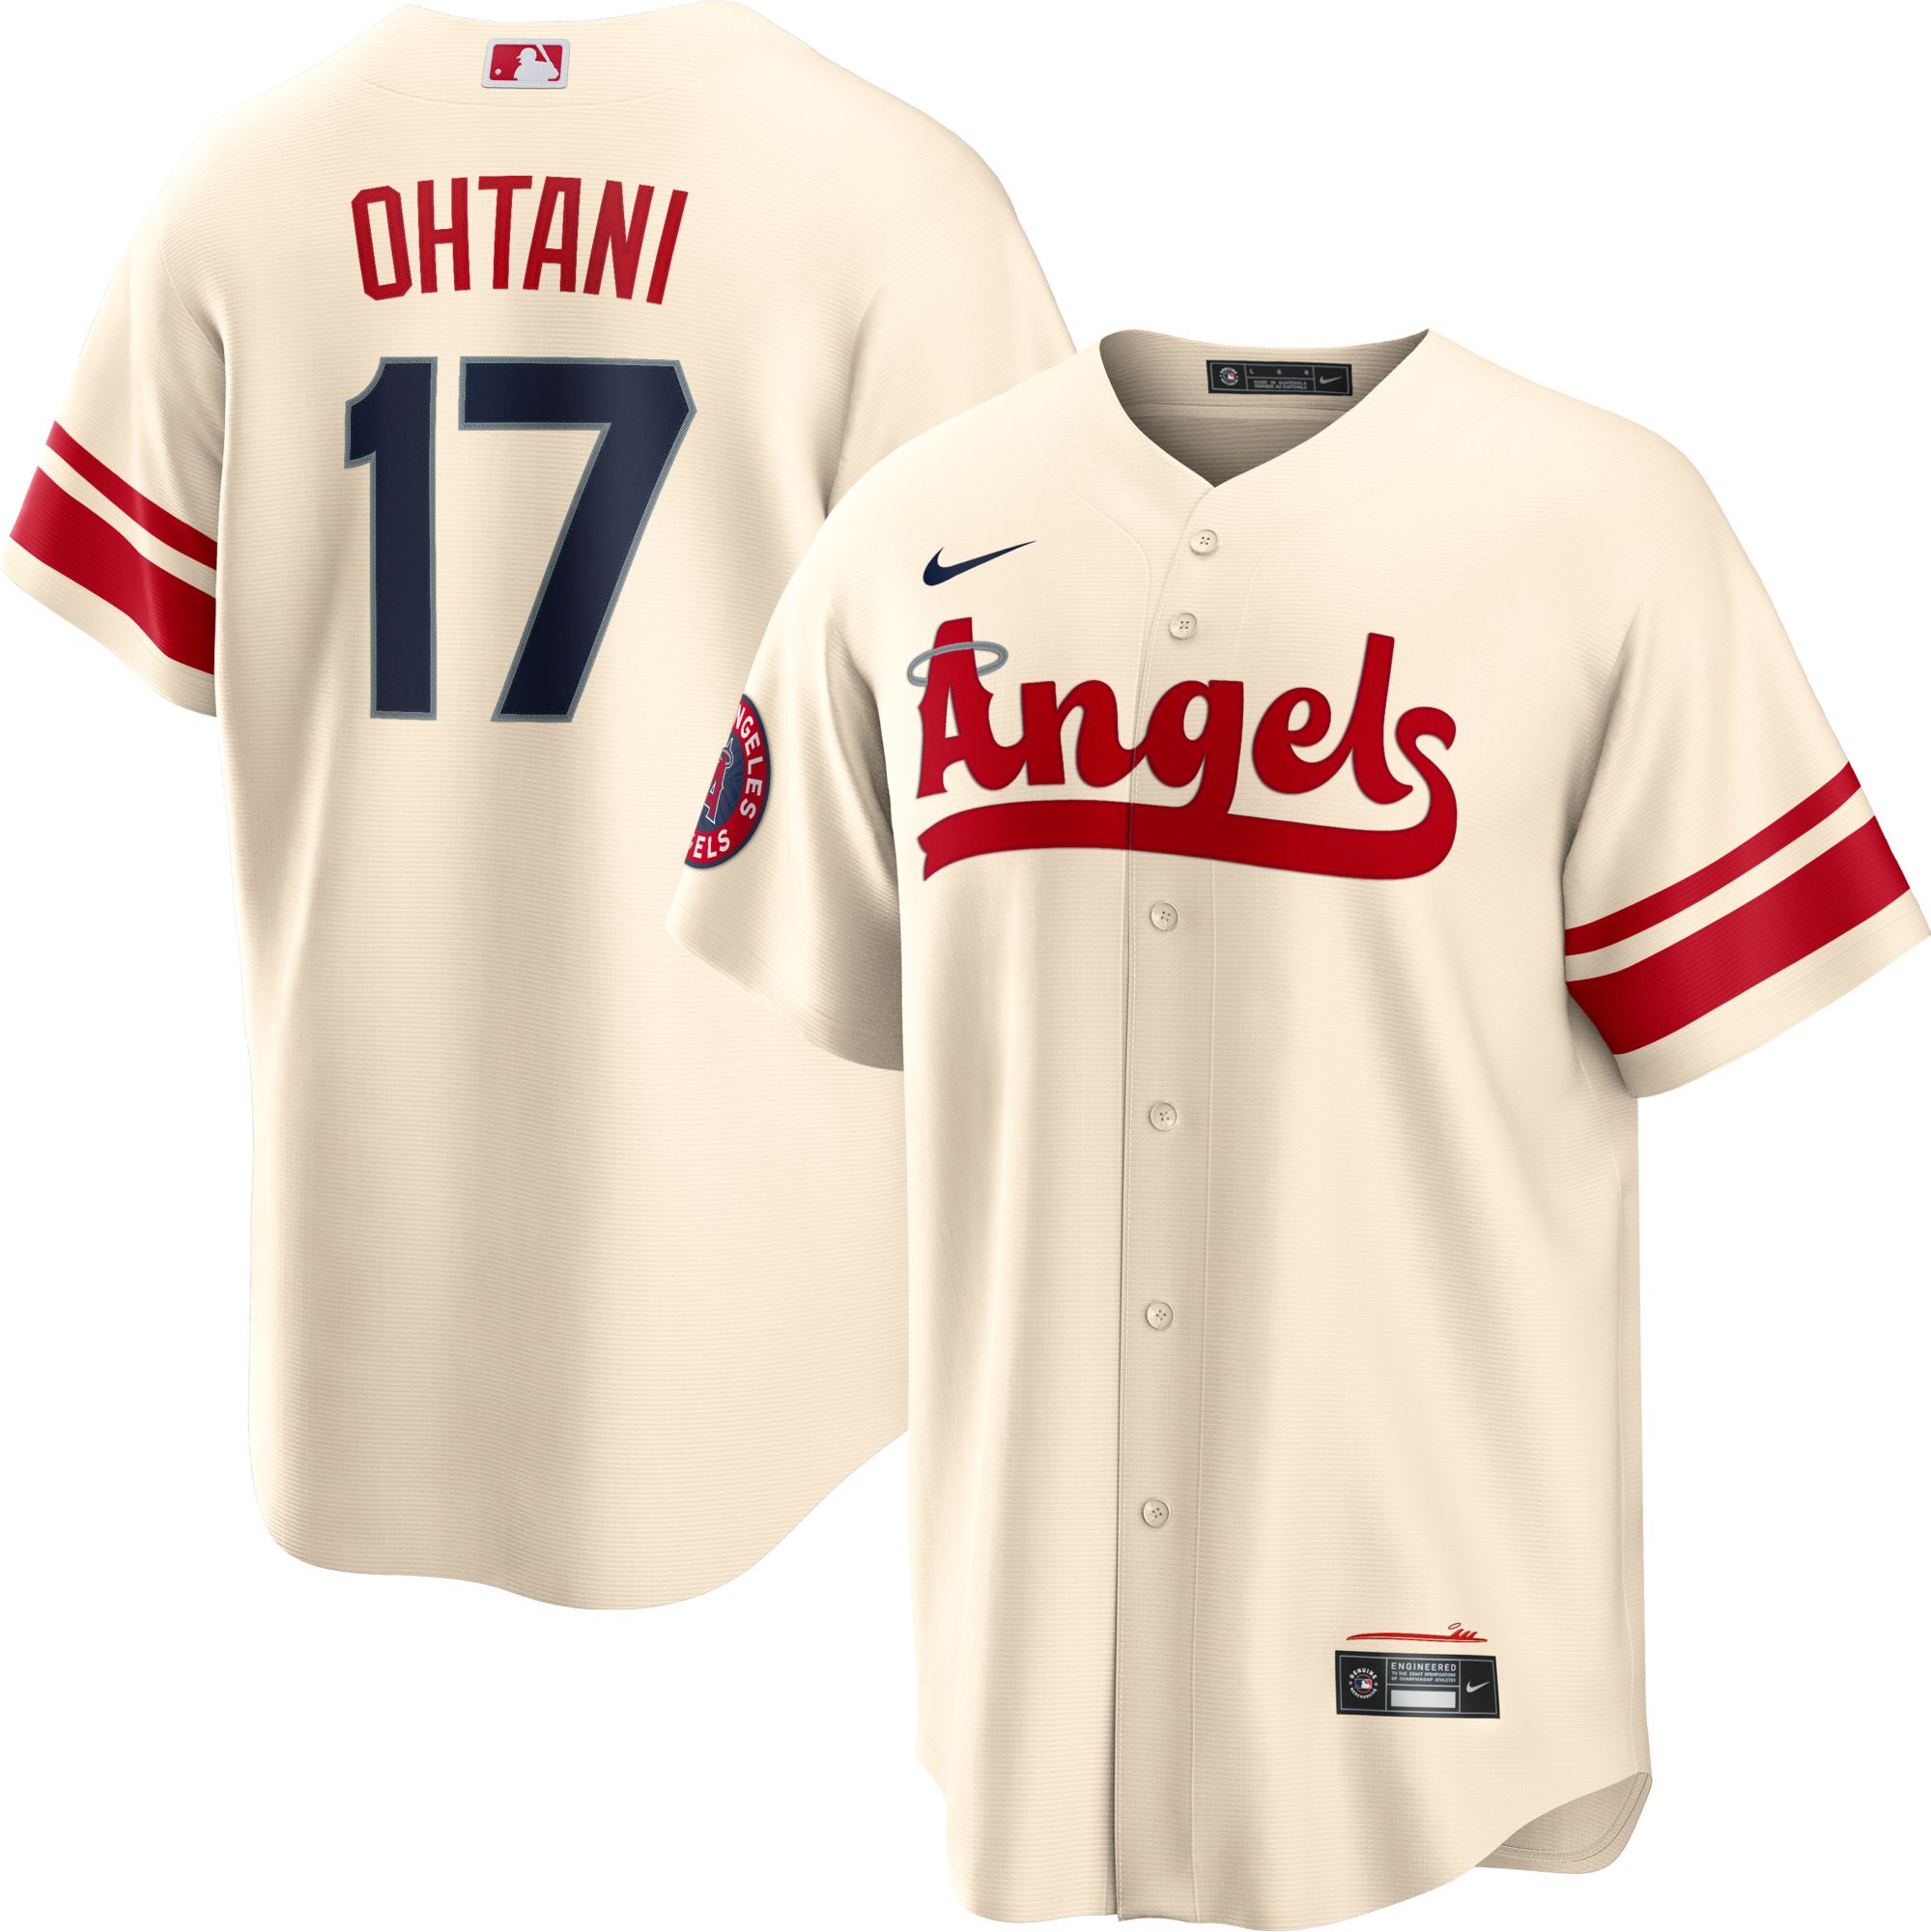 Shohei Ohtani Jerseys & Gear  Curbside Pickup Available at DICK'S